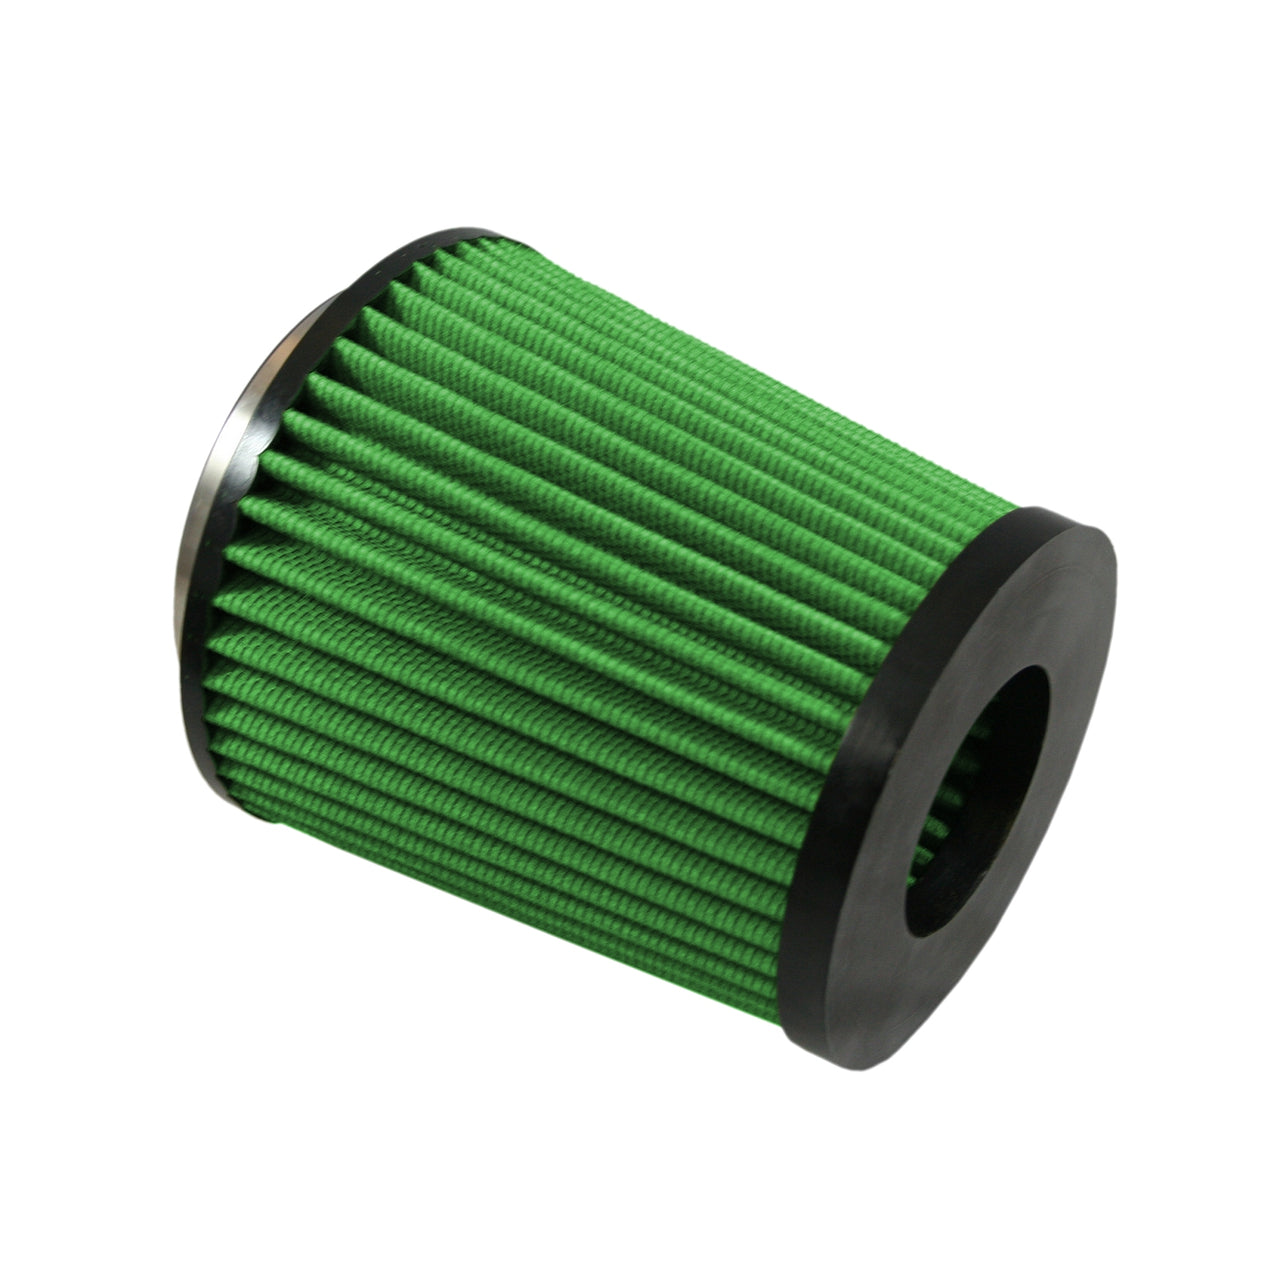 Green Filter Dual Cone Filter - ID 3.15in. / Base 5.5in. / Top 4.7in. / H 5.9in.